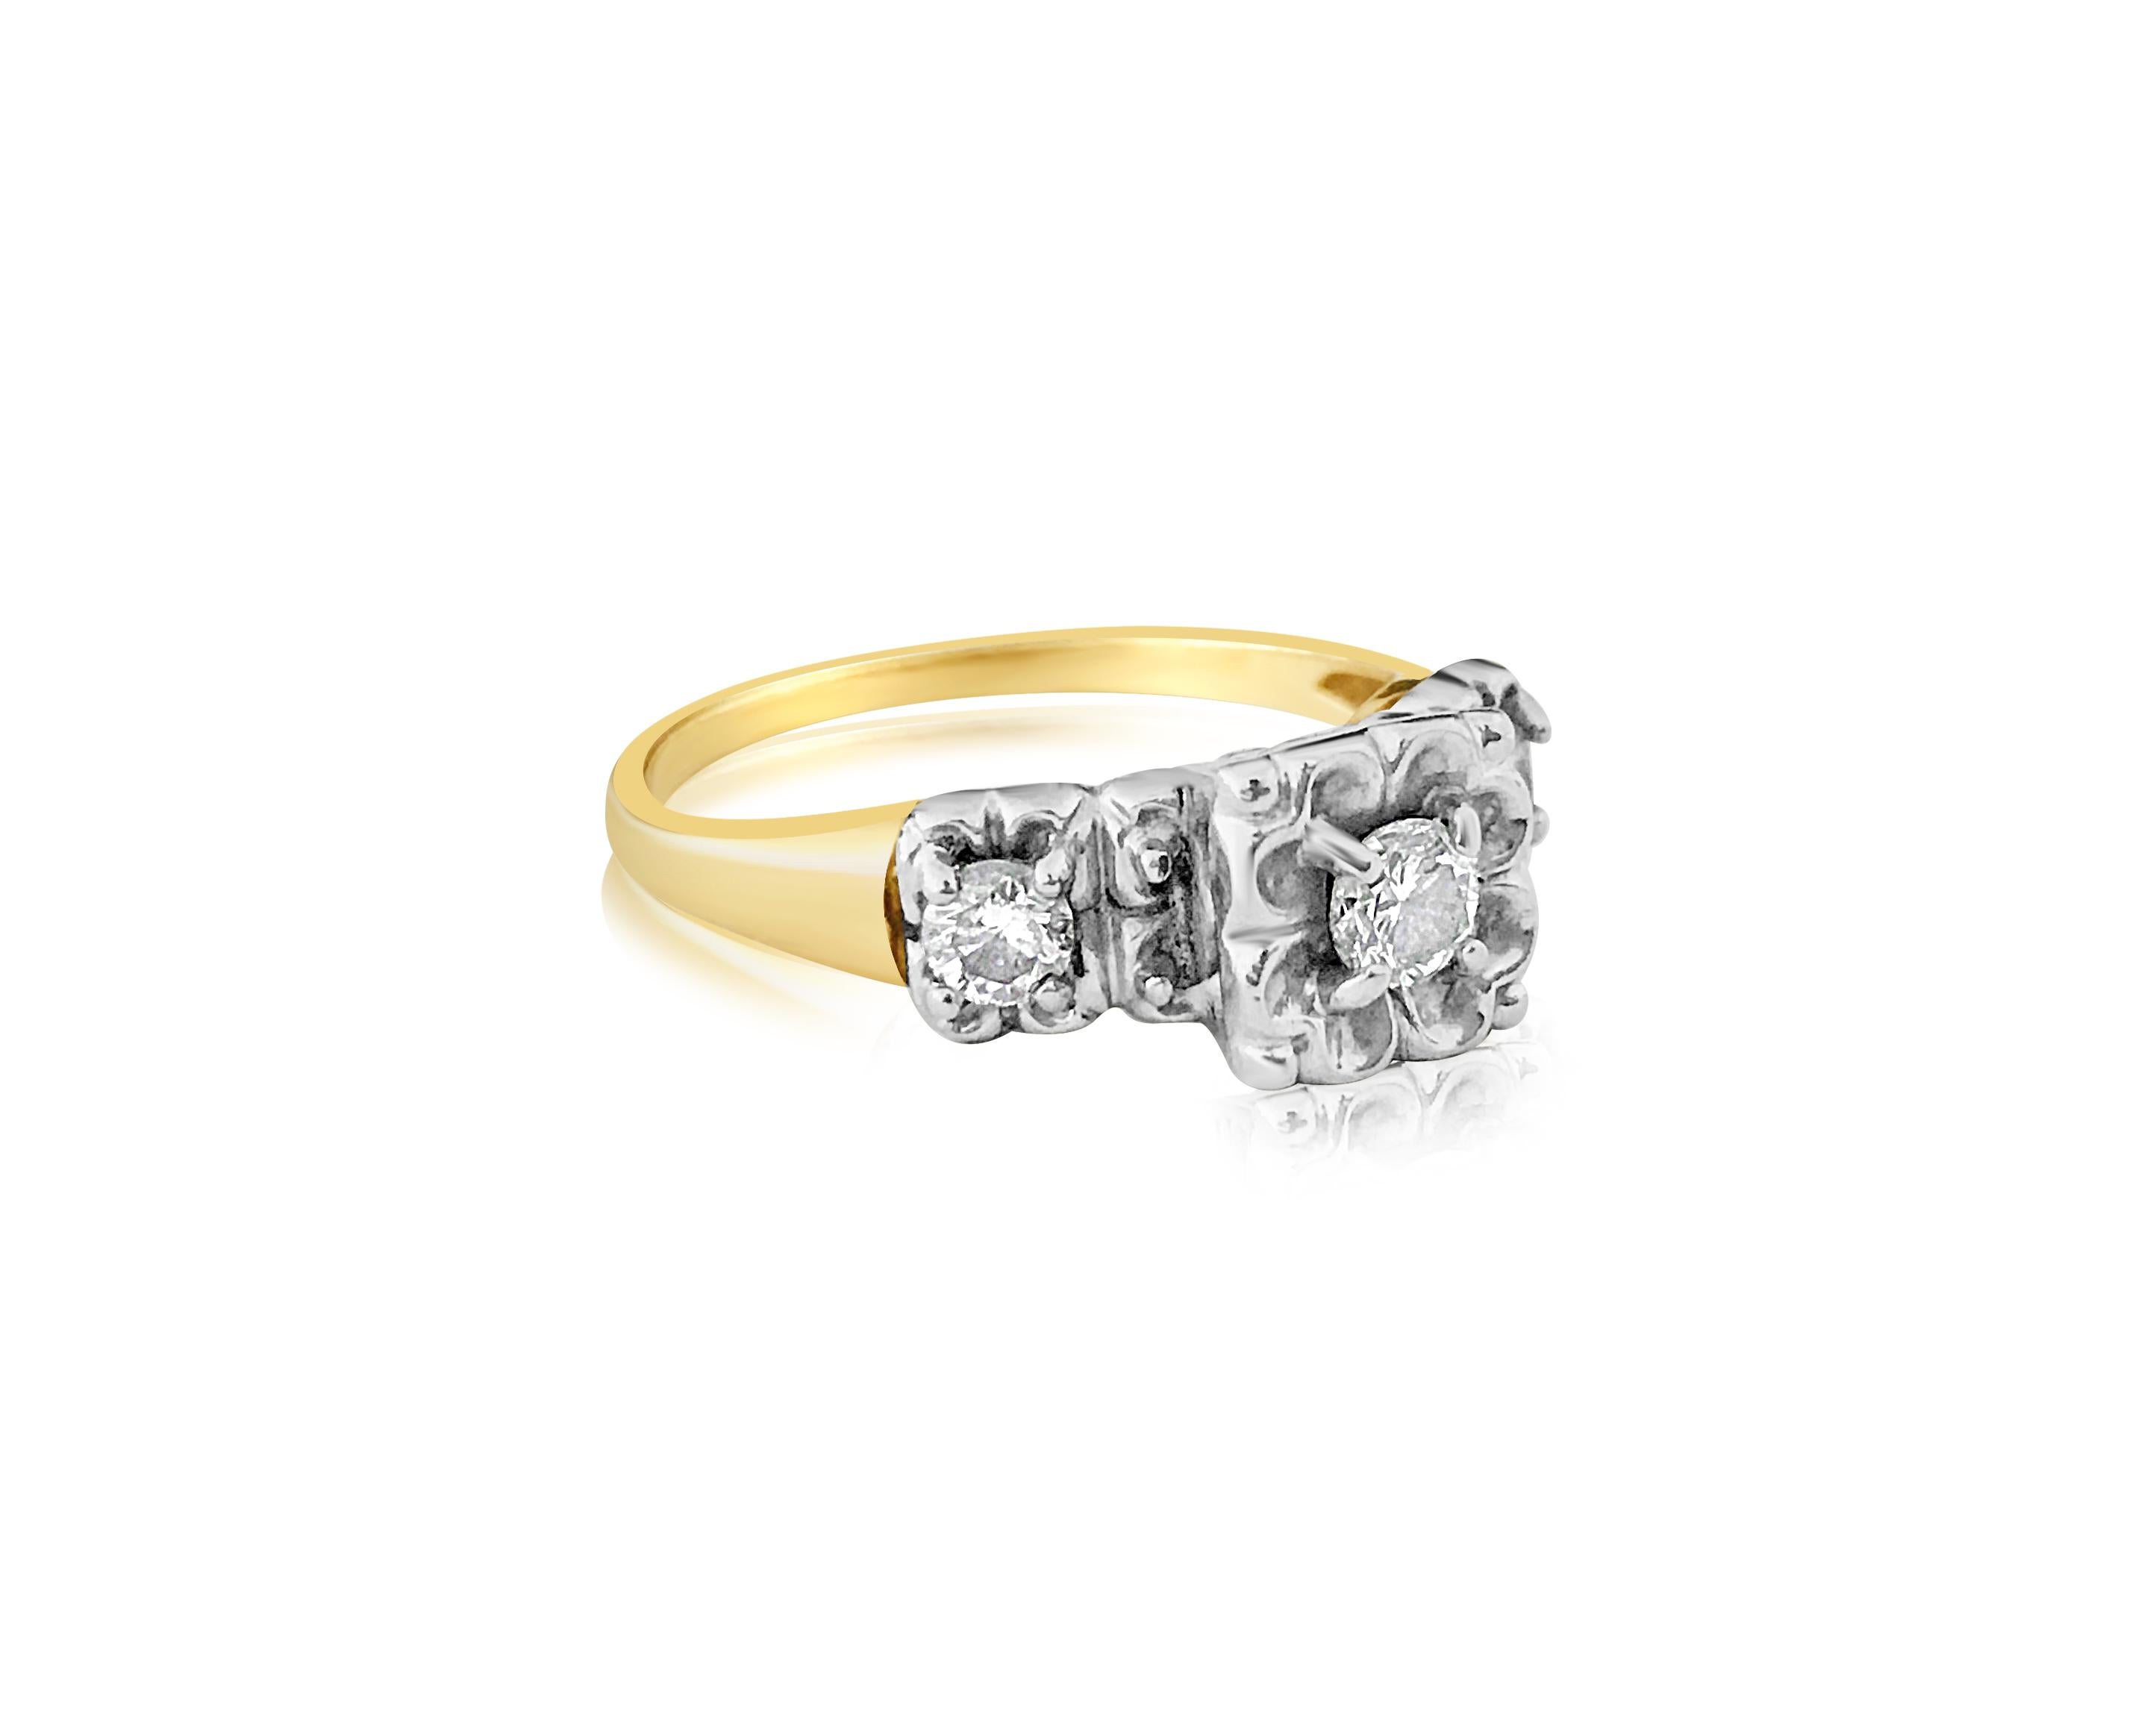 Metal: 14k yellow and white gold, two tone. 

Total carat weight of all diamonds: 0.37 carats. VS clarity and G color. Round brilliant cut diamonds set in prongs. All diamonds are 100% natural earth mined. 

Gorgeous vintage ladies and diamond ring.